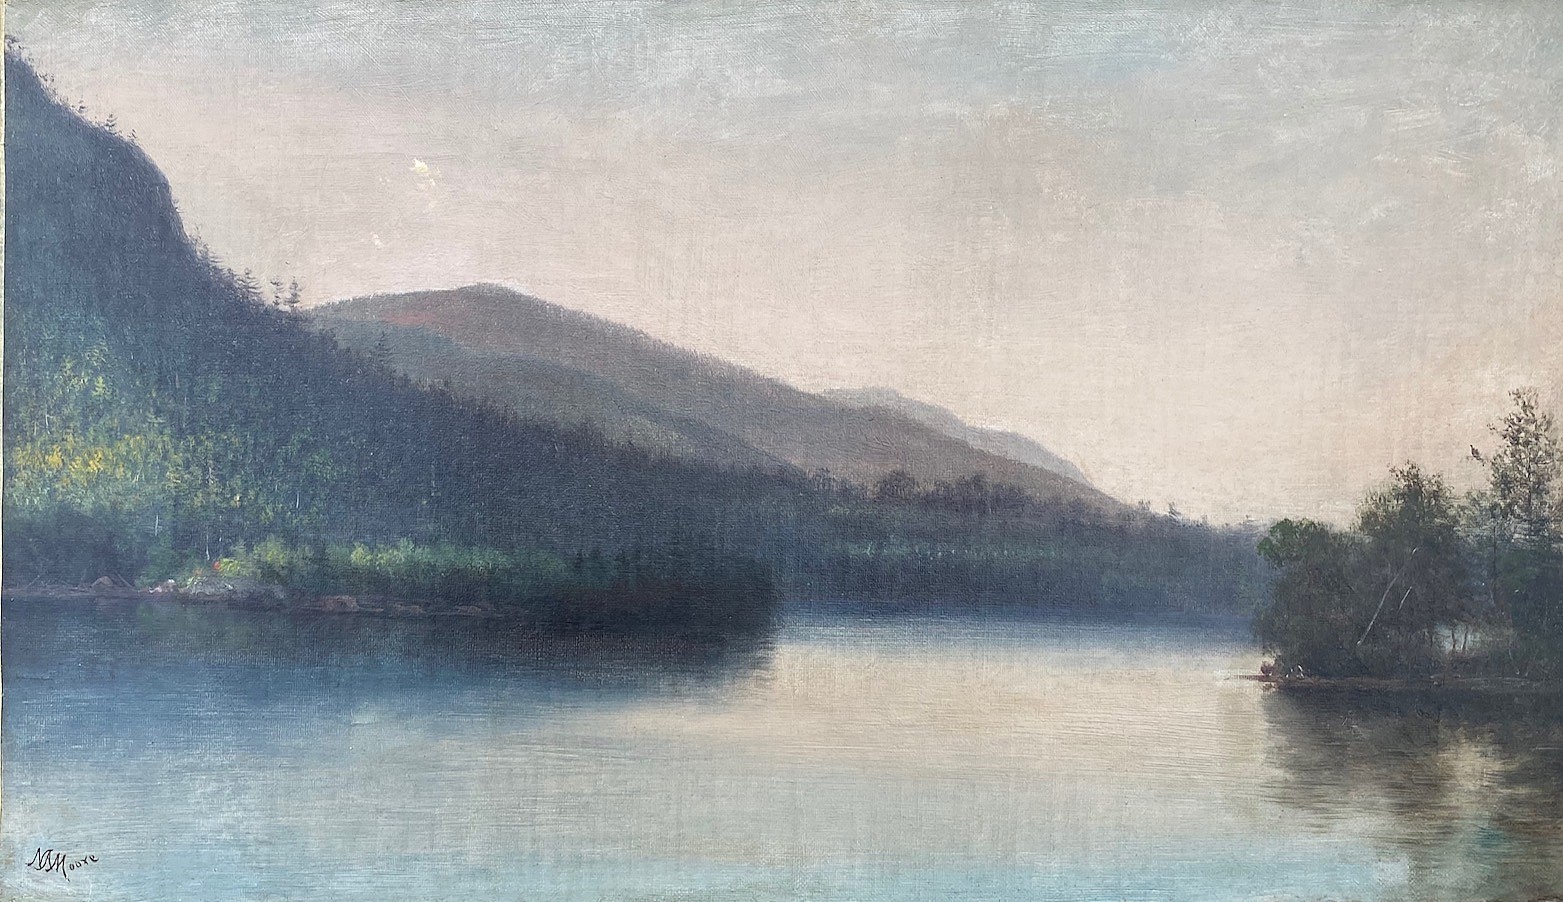 Nelson Augustus Moore, Lake George, c. 1870
oil on canvas, 12" x 20"
signed NA Moore, l.l.
JCA 6243
$5,500